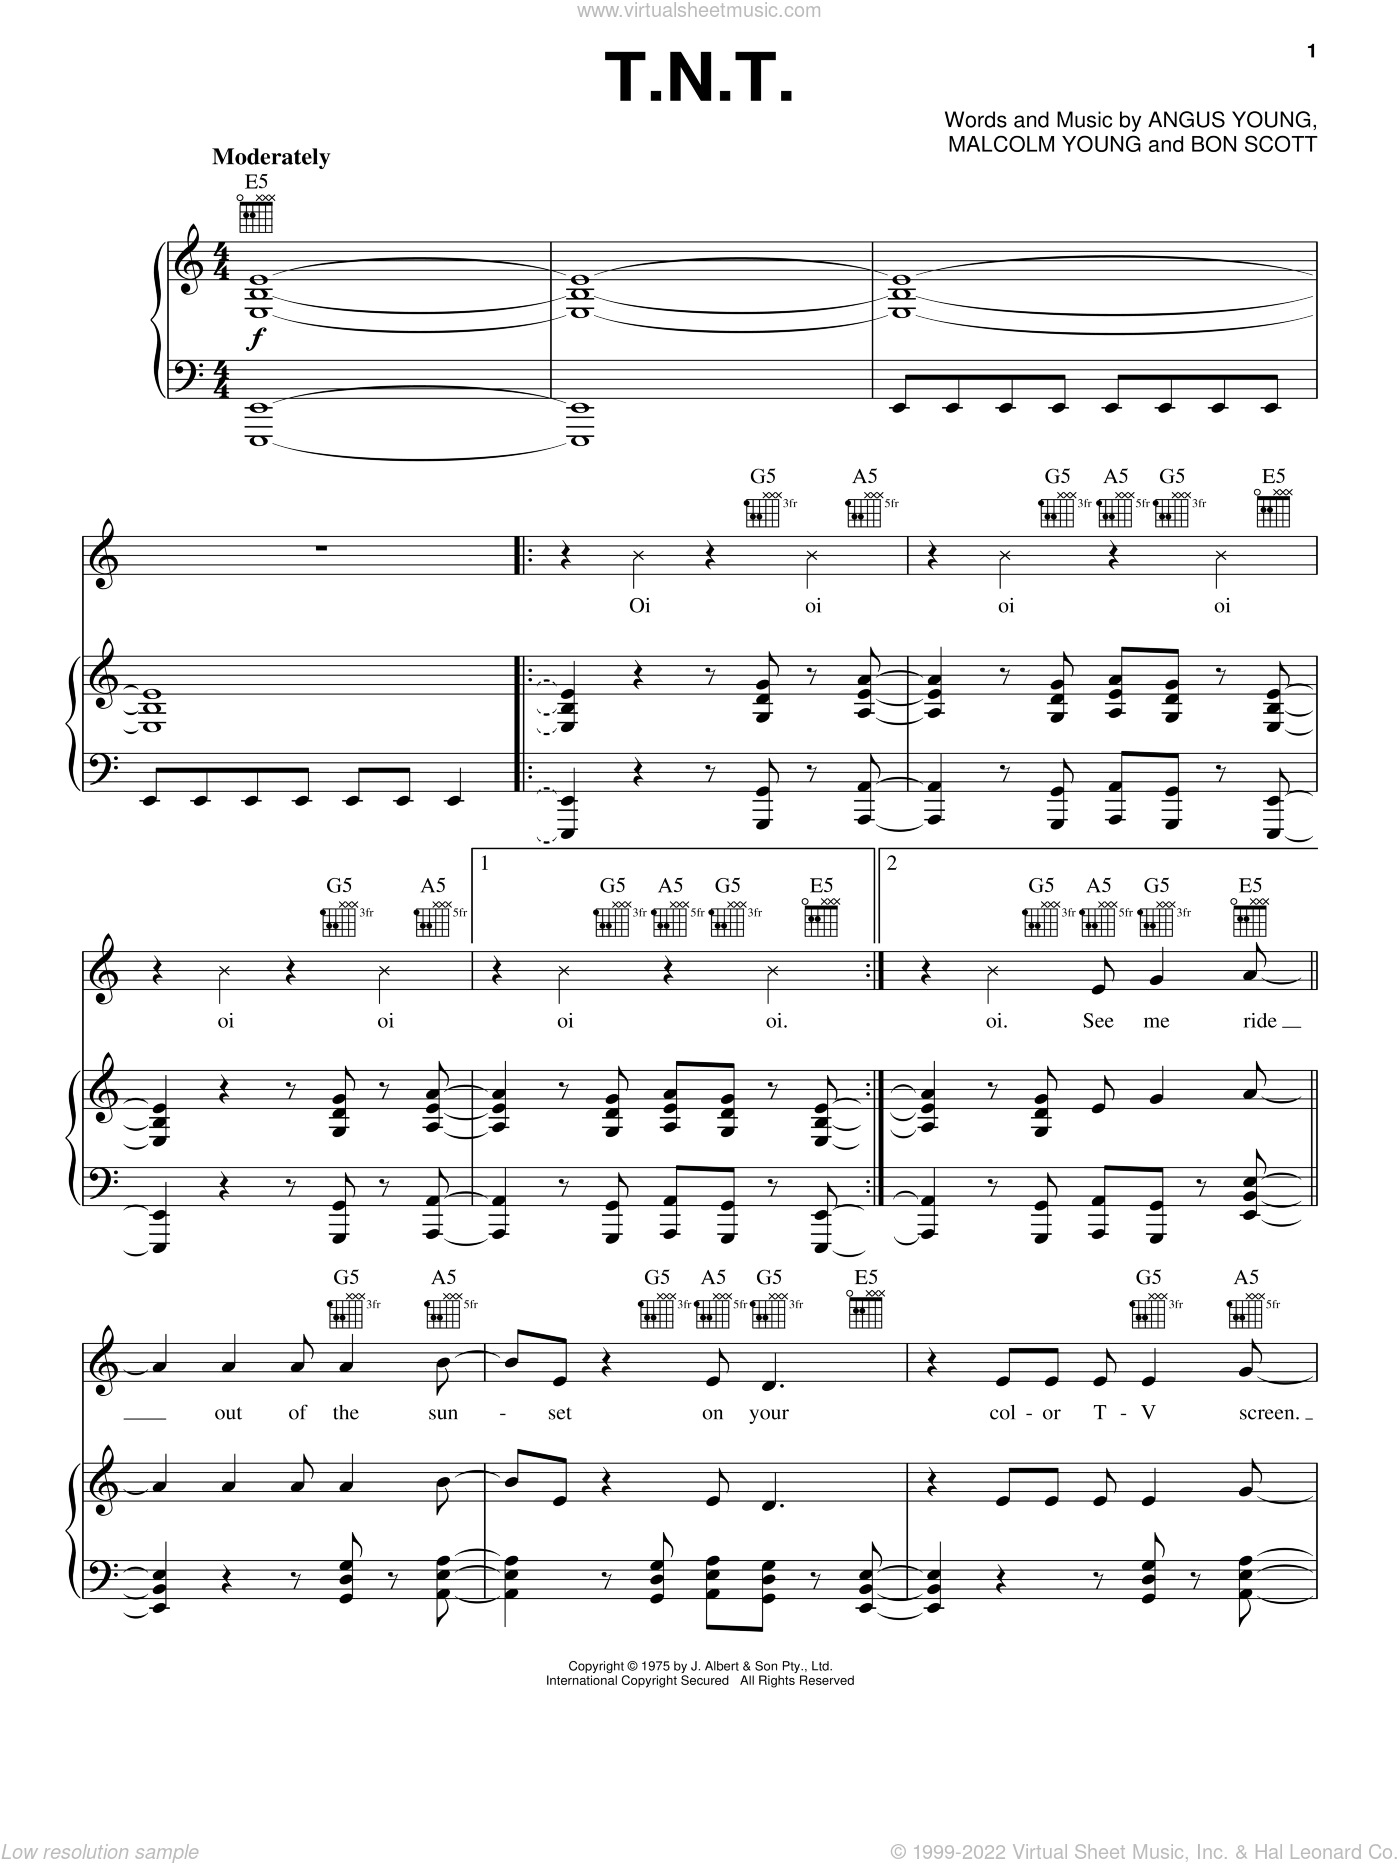 Ac Dc T N T Sheet Music For Voice Piano Or Guitar Pdf Young angus mckinnon, scott ronald belford lyrics powered by www.musixmatch.com. ac dc t n t sheet music for voice piano or guitar pdf